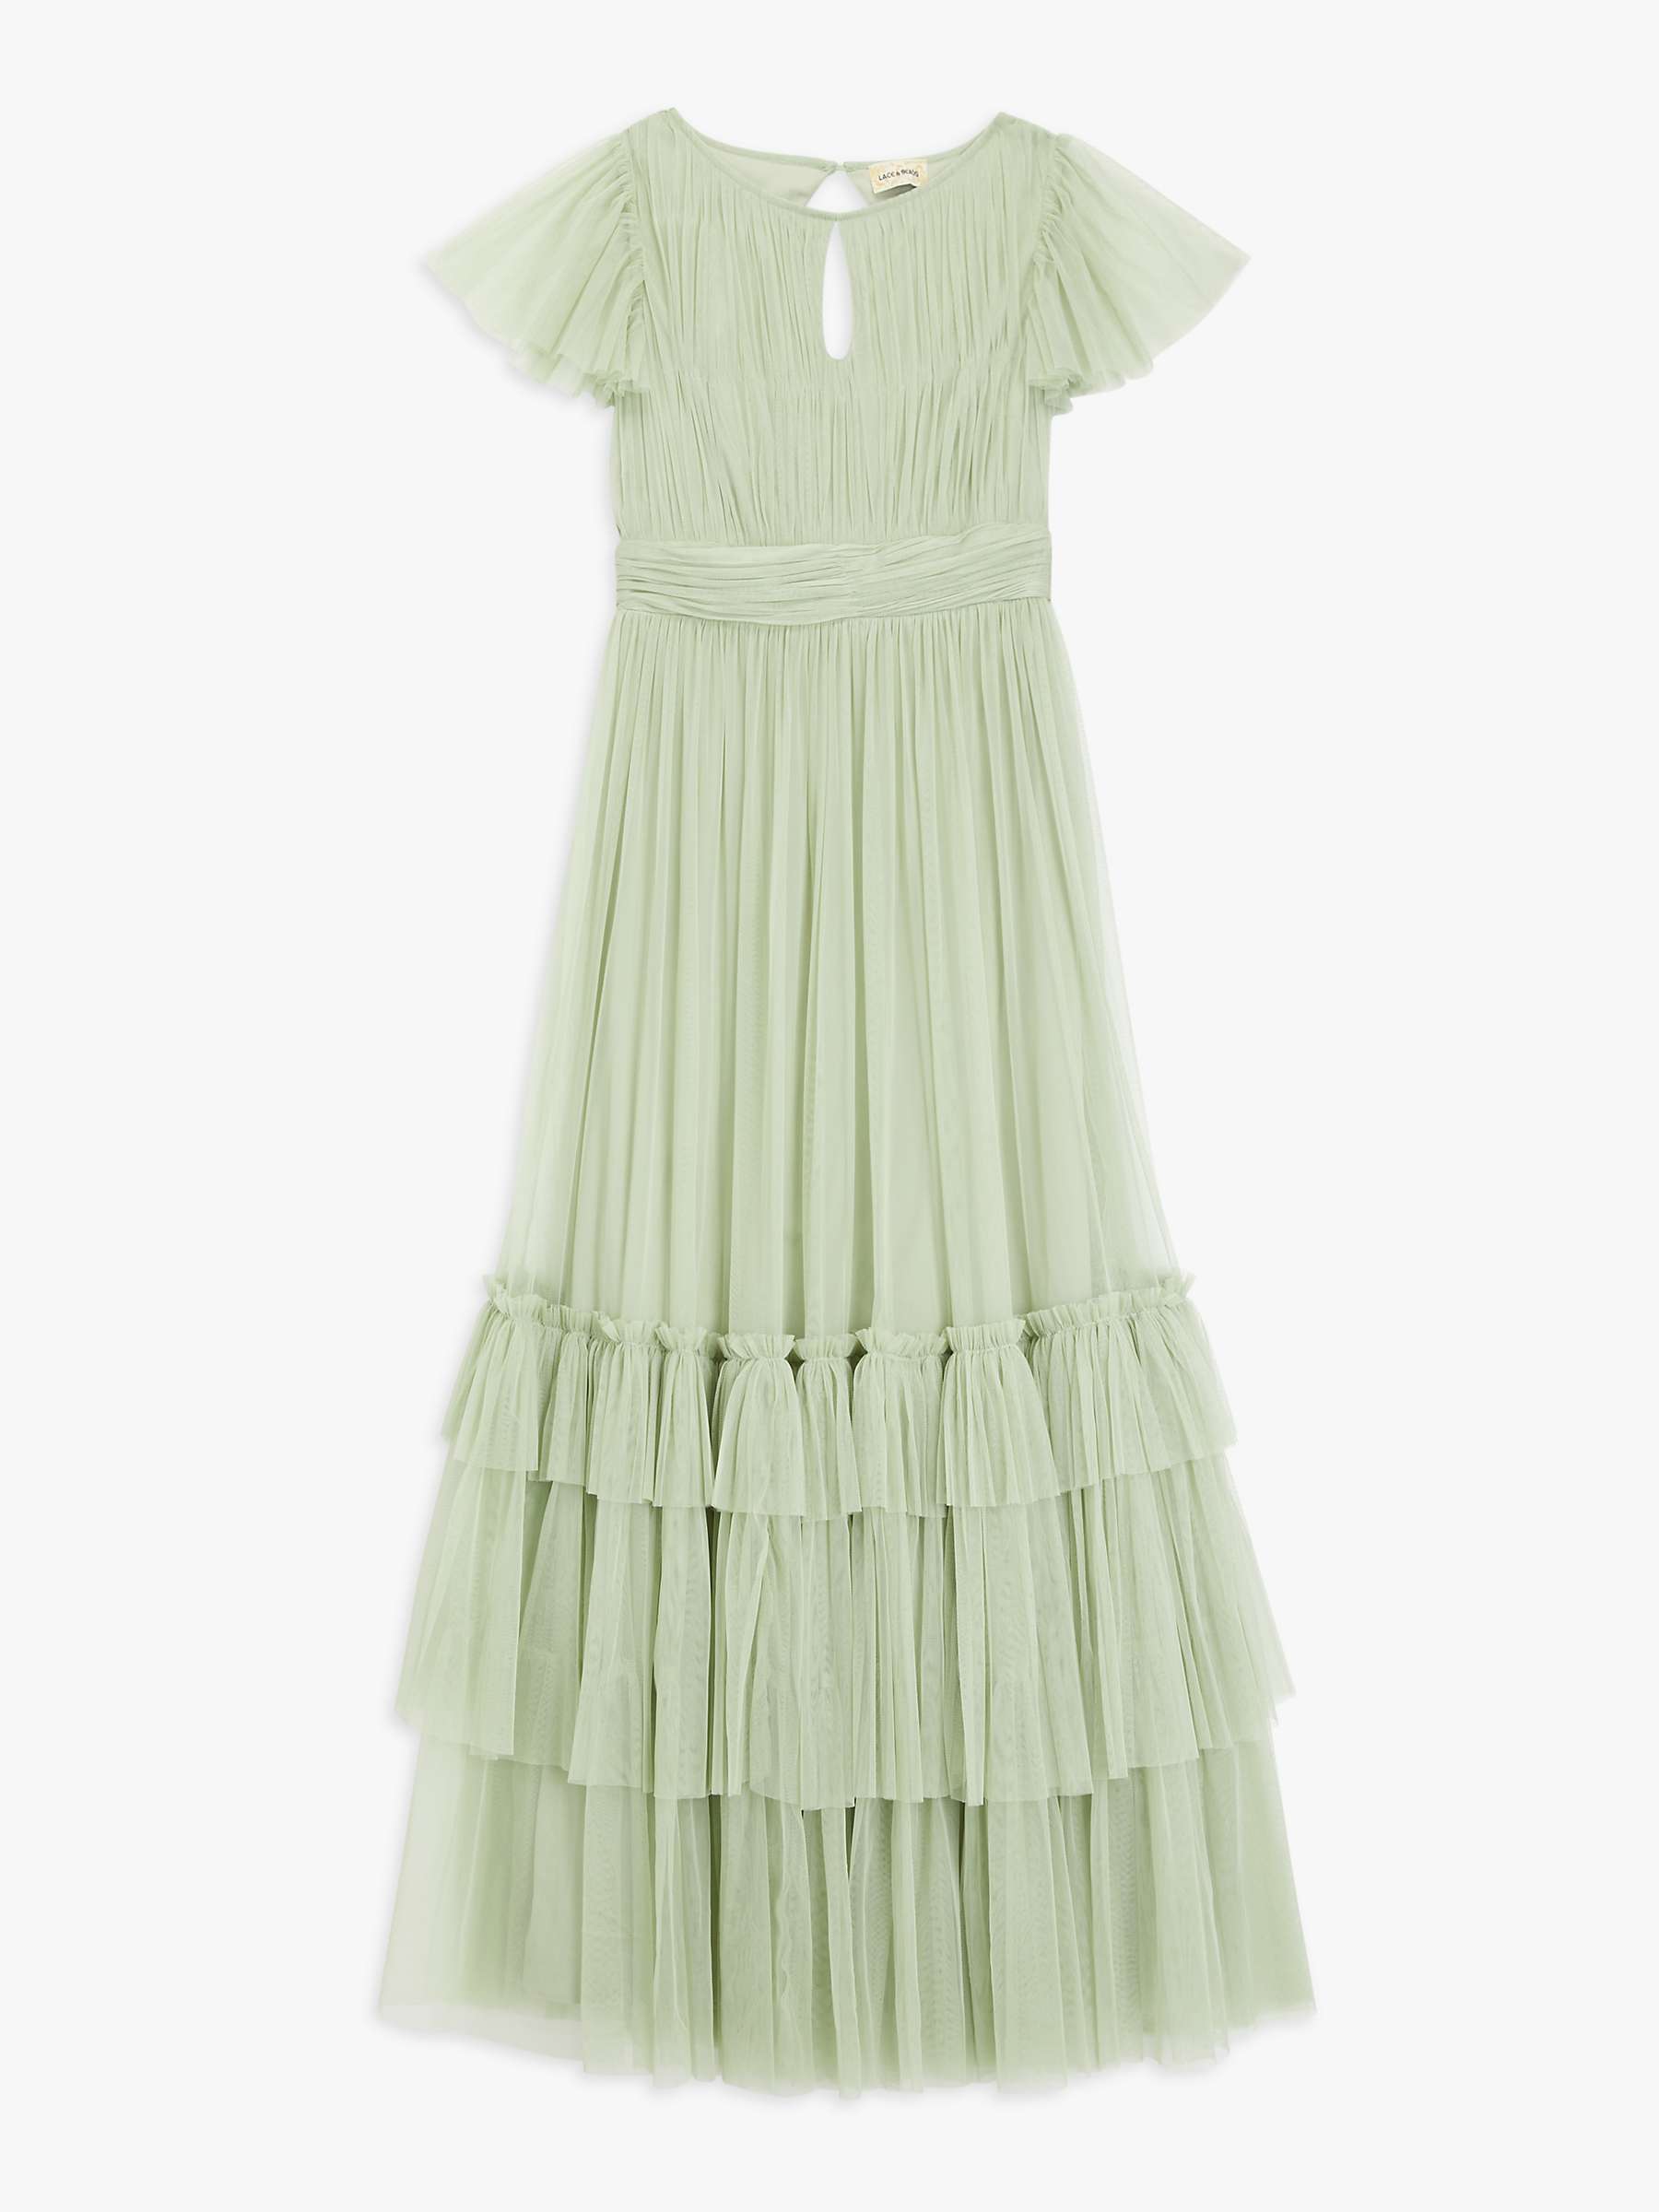 Buy Lace & Beads Diva Tiered Hem Maxi Dress Online at johnlewis.com